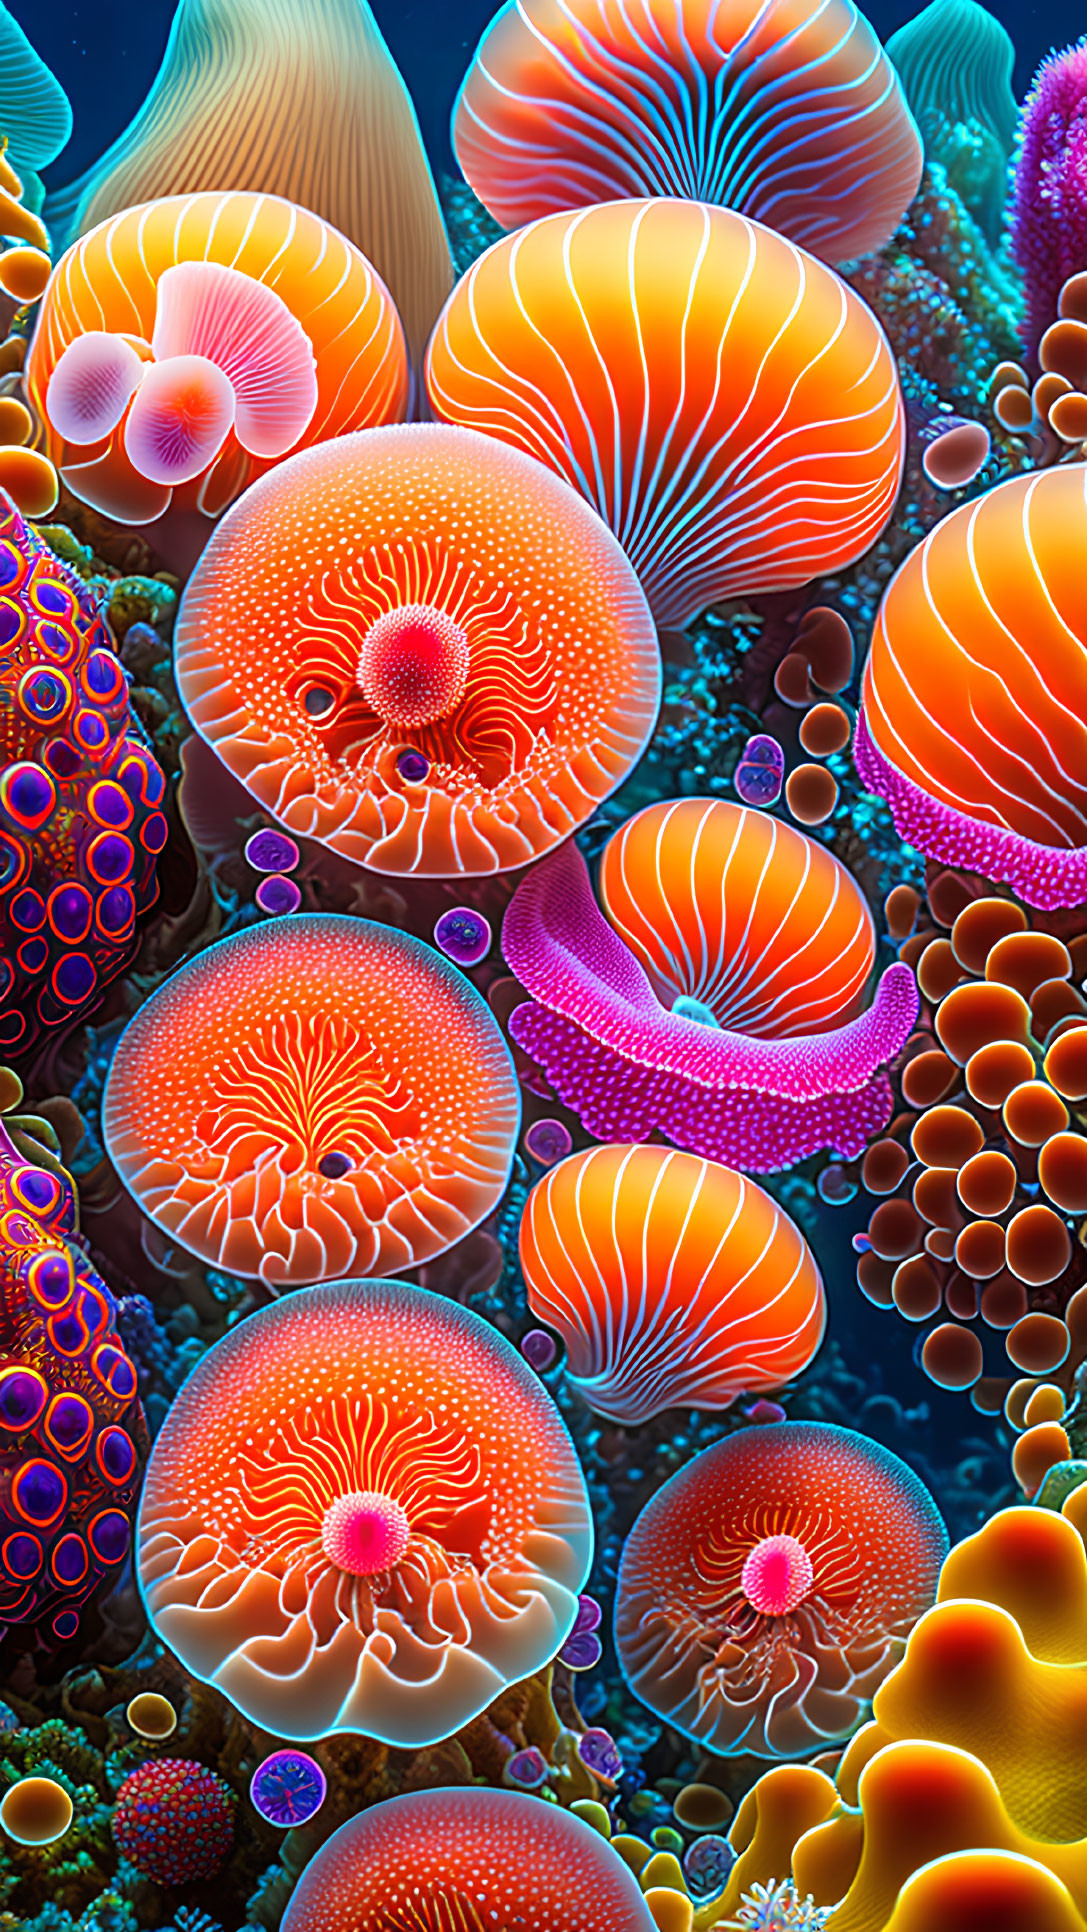 Colorful Coral Reef with Bubbles in Blue Underwater Scene